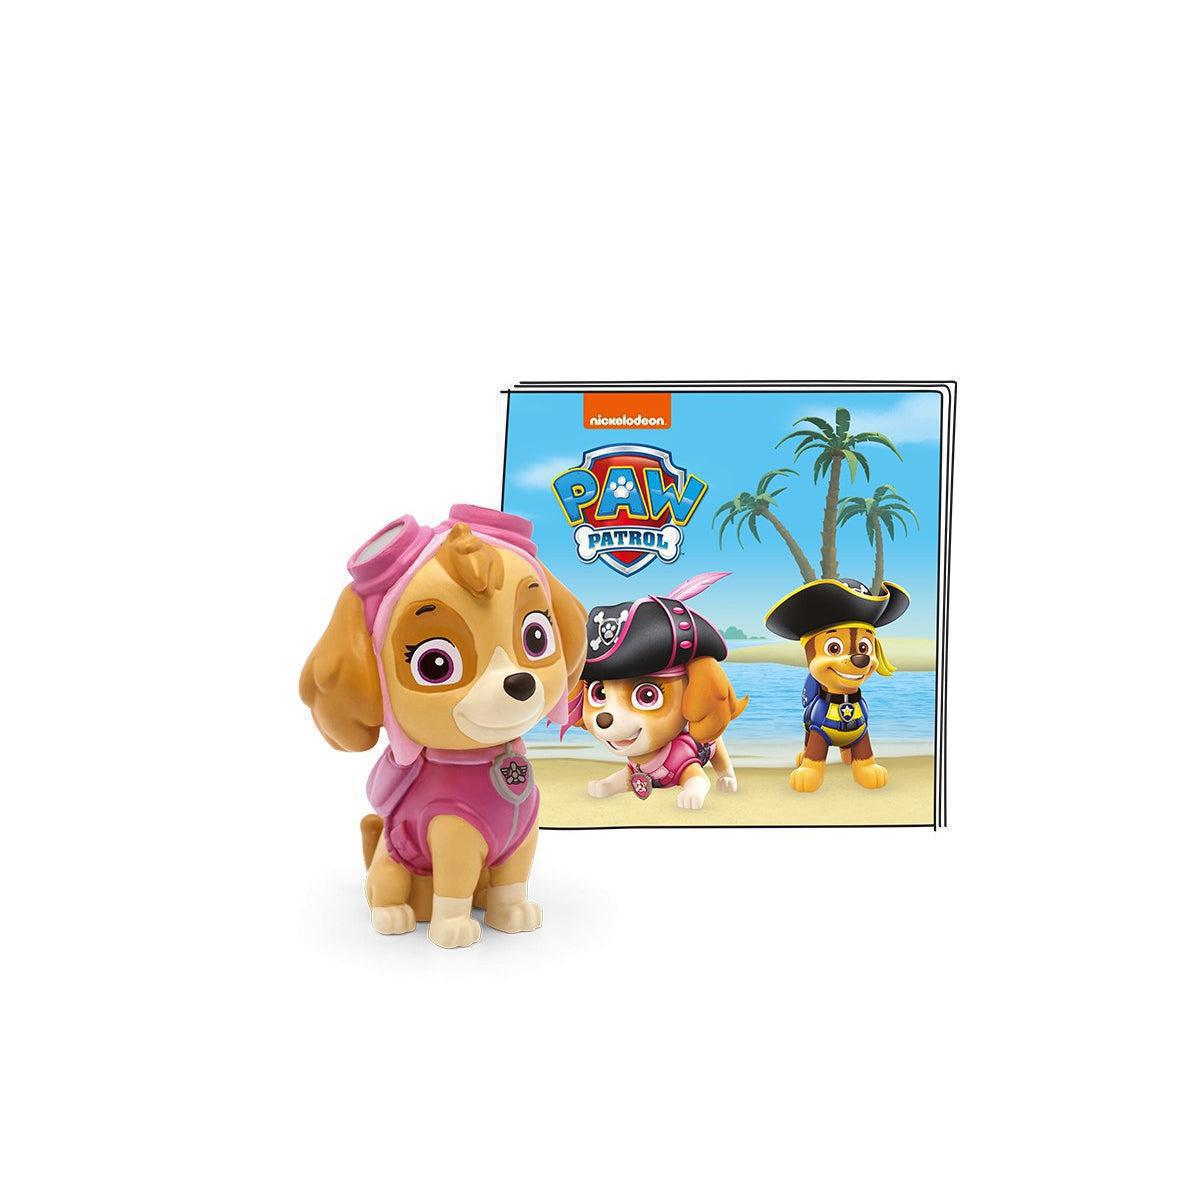 Tonies Paw Patrol - Skye - Audio Character for use with Toniebox Player